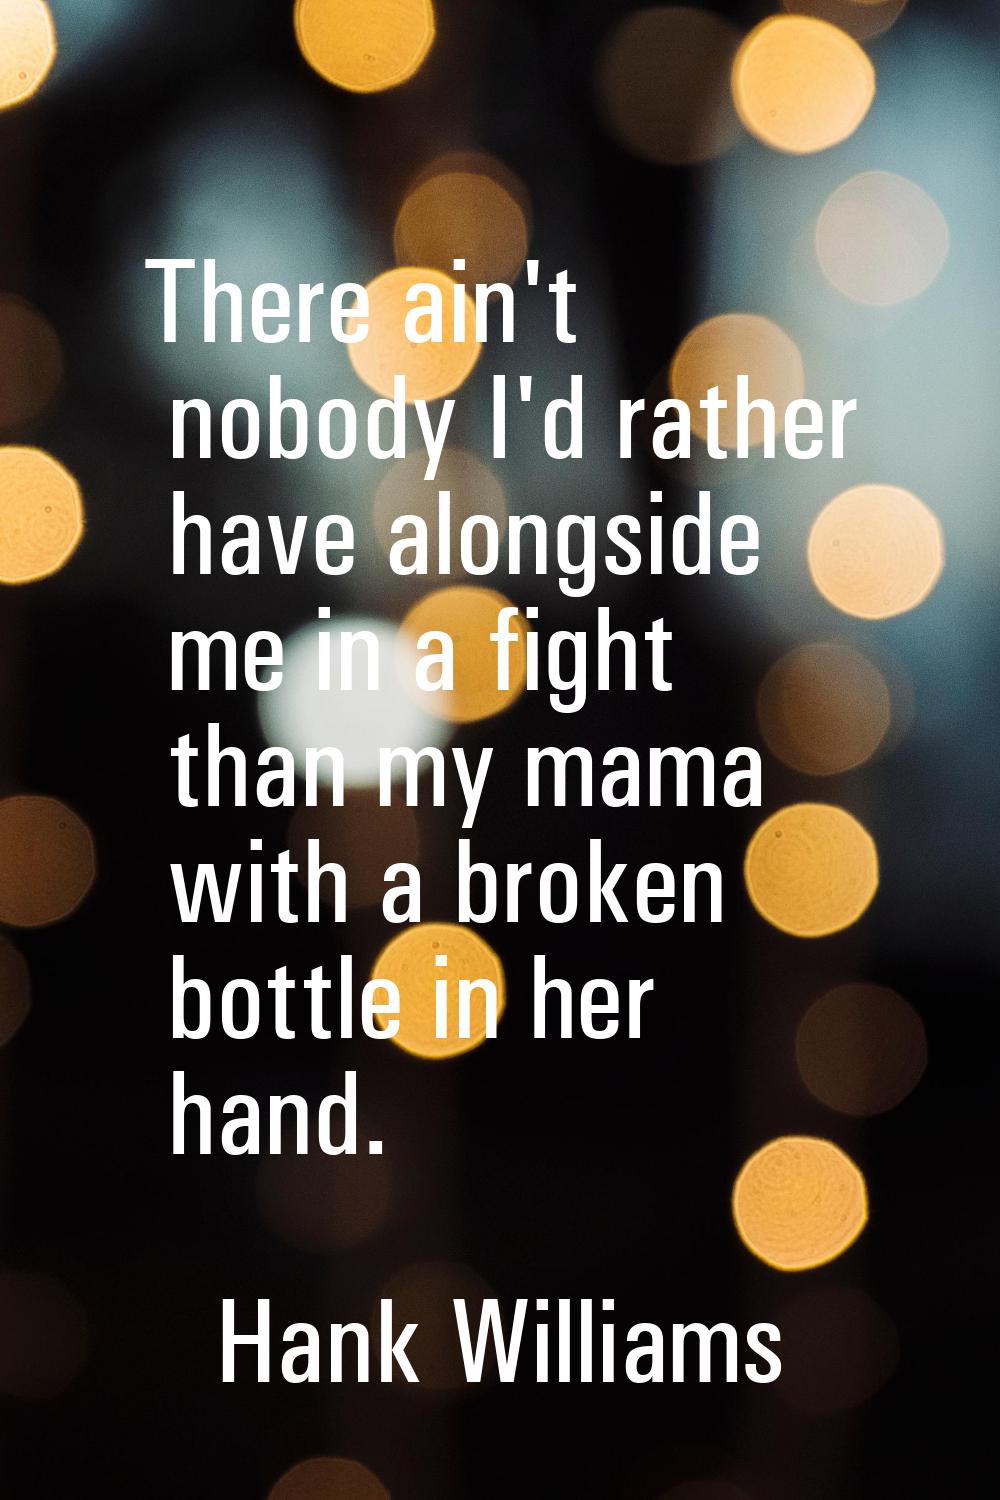 There ain't nobody I'd rather have alongside me in a fight than my mama with a broken bottle in her